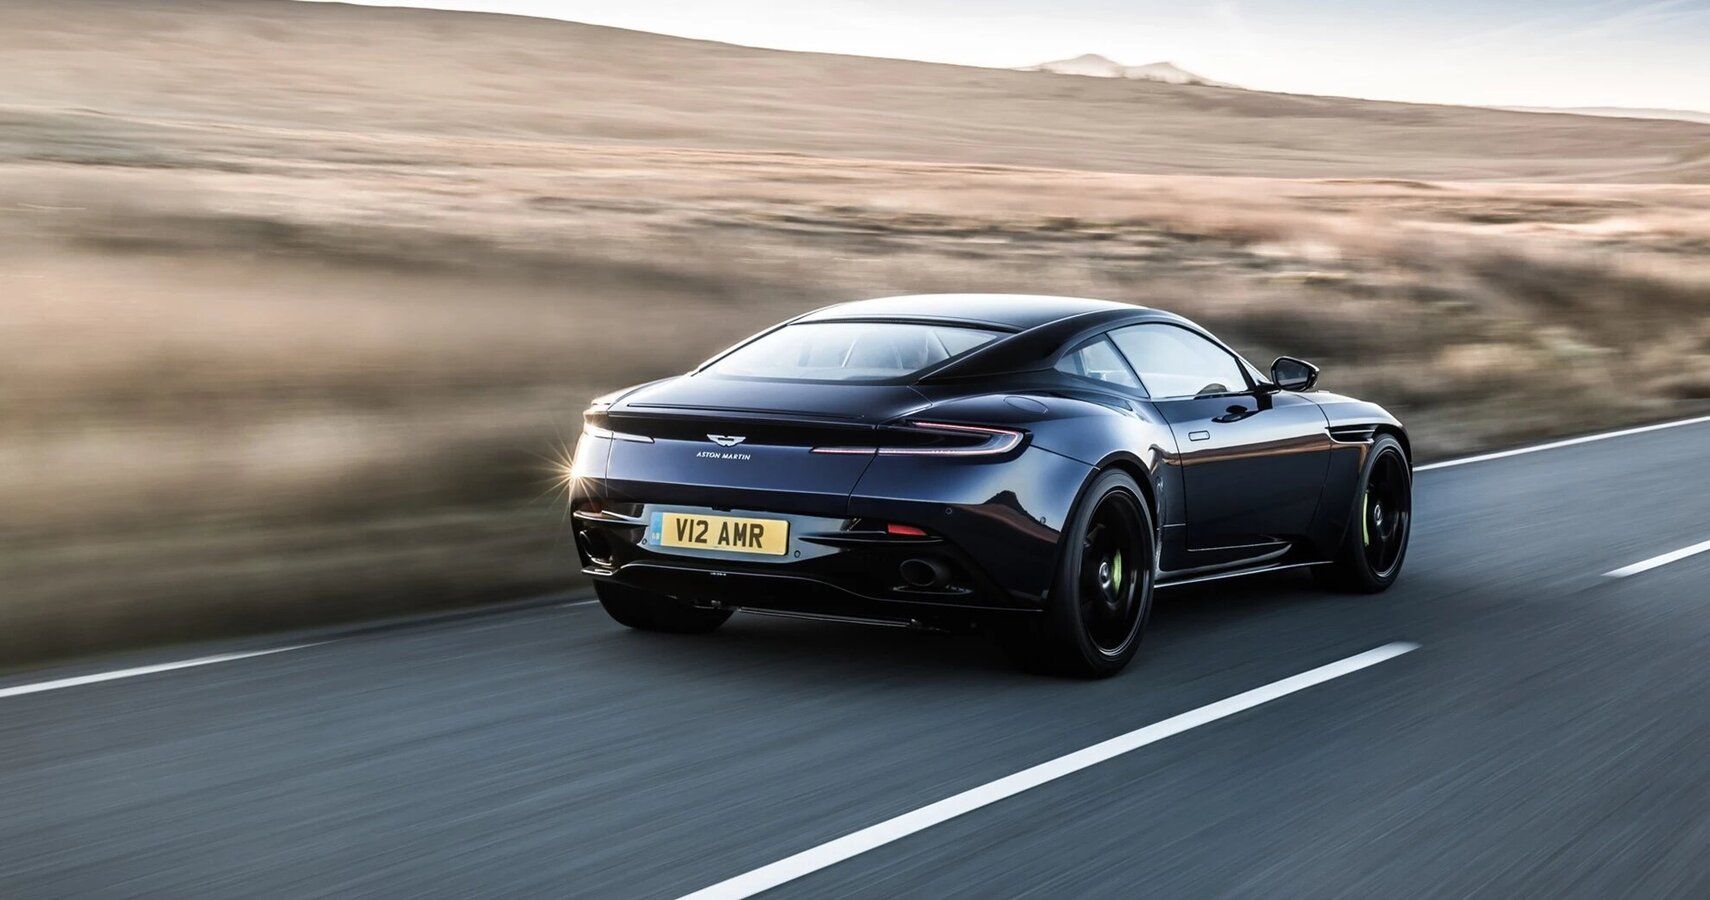 Here's What We Expect From The 2021 Aston Martin DB11